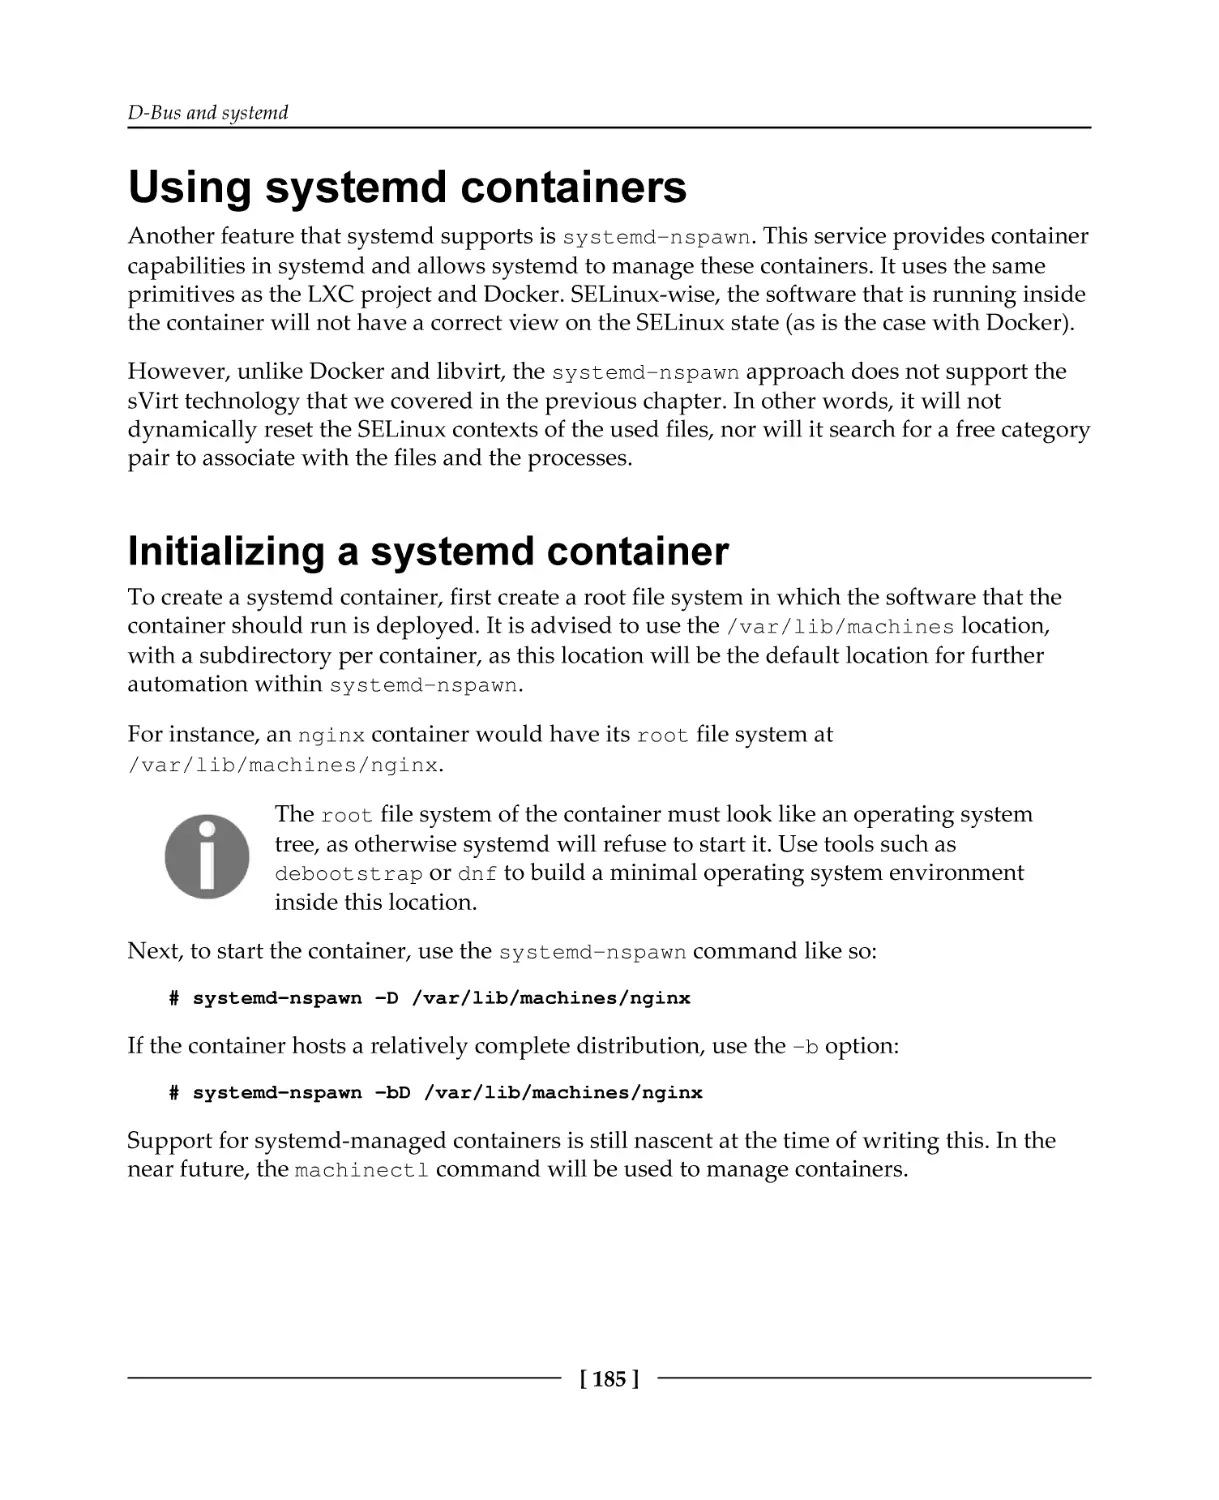 Using systemd containers
Initializing a systemd container